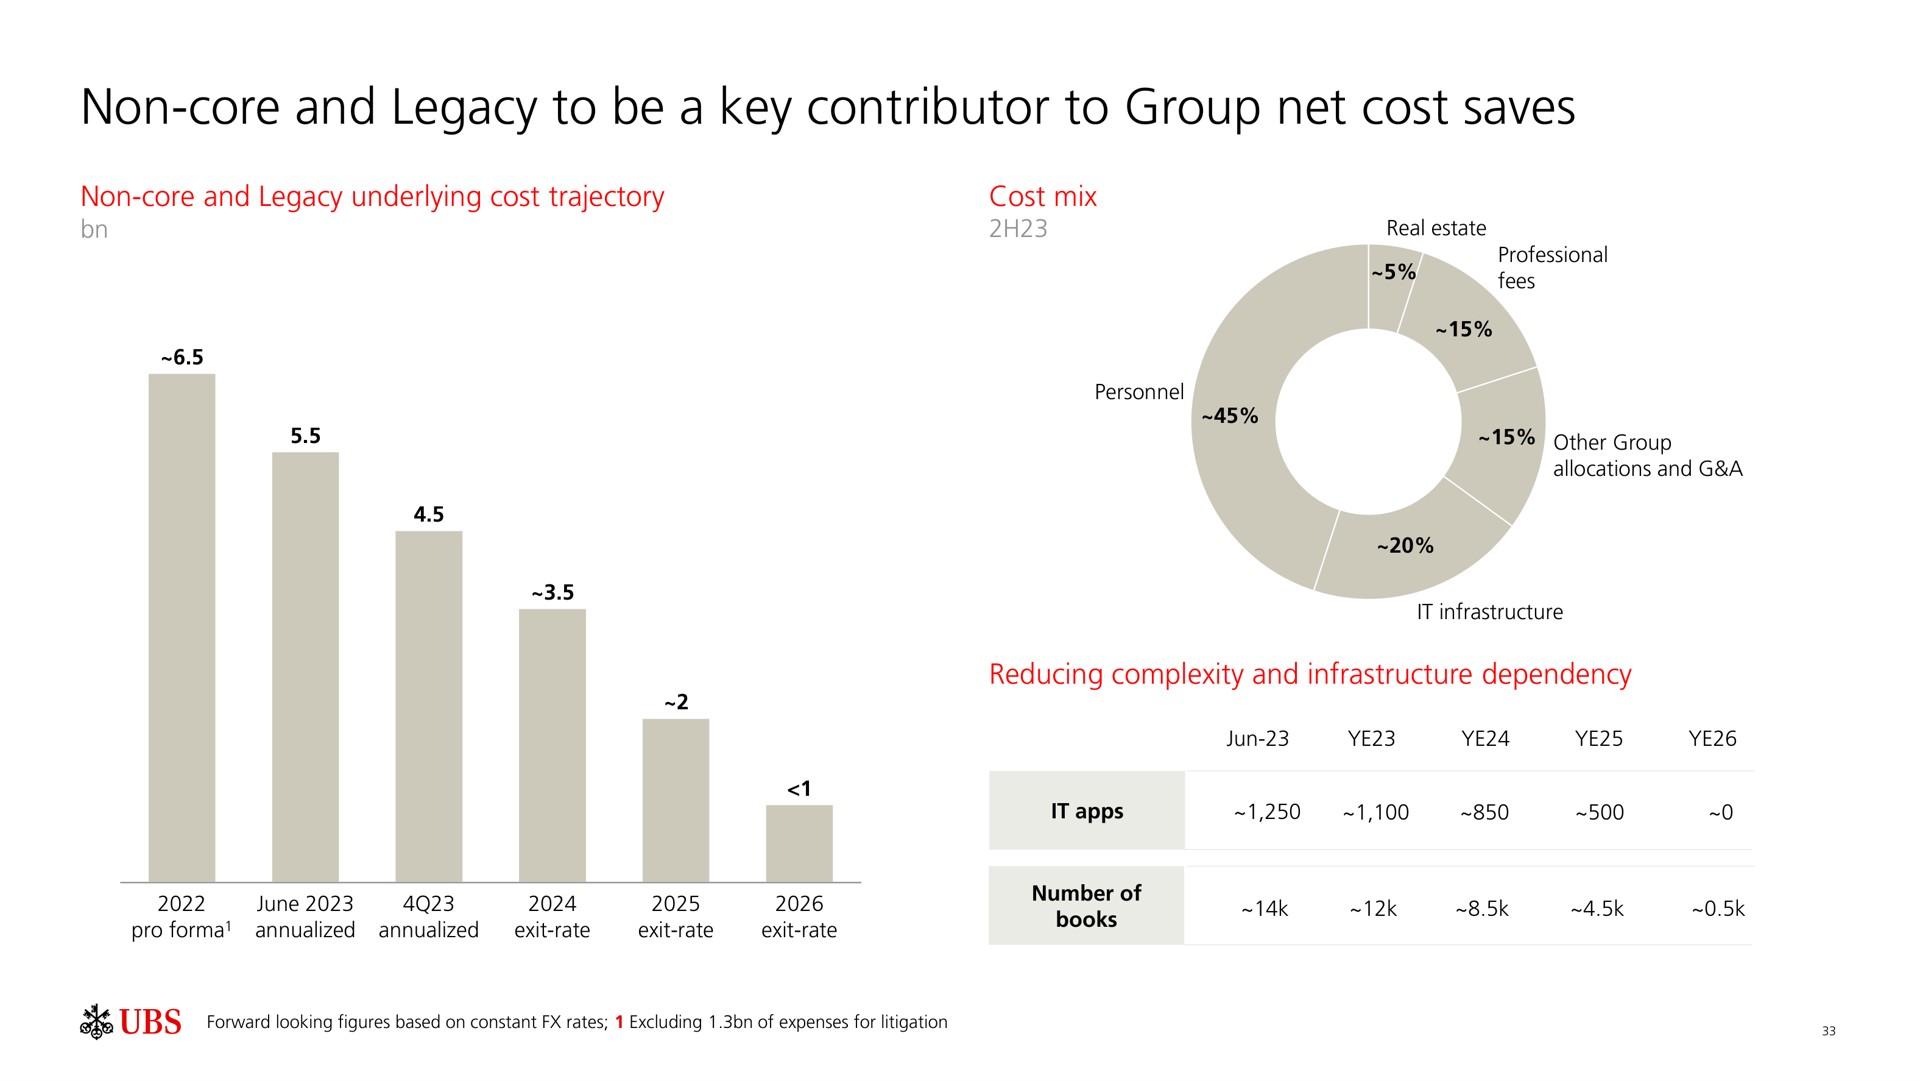 non core and legacy to be a key contributor to group net cost saves | UBS